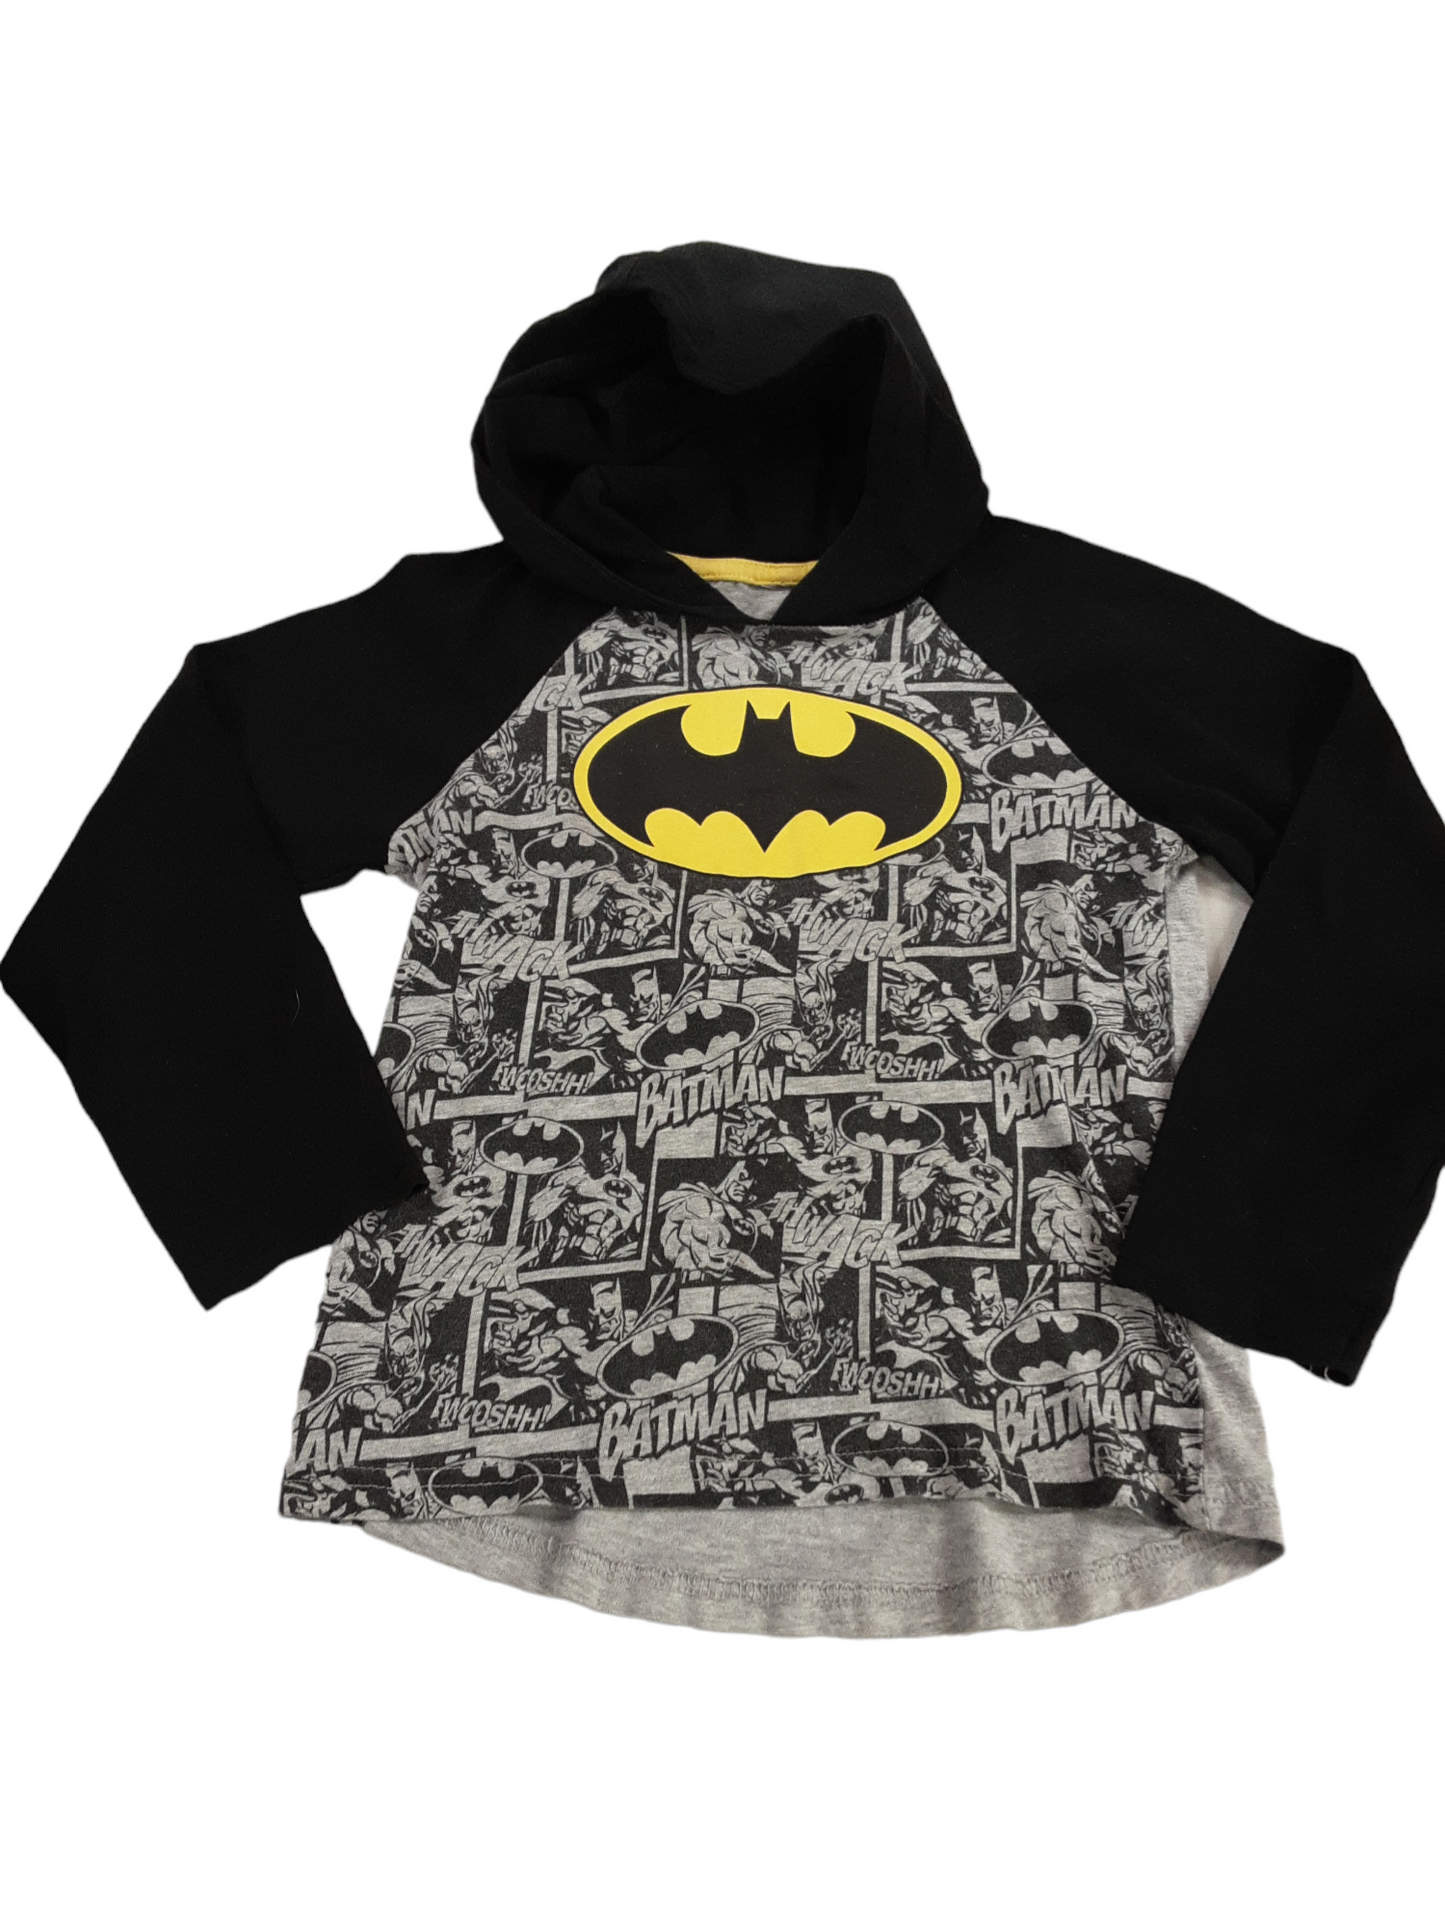 Hooded Marvel top size 7-8